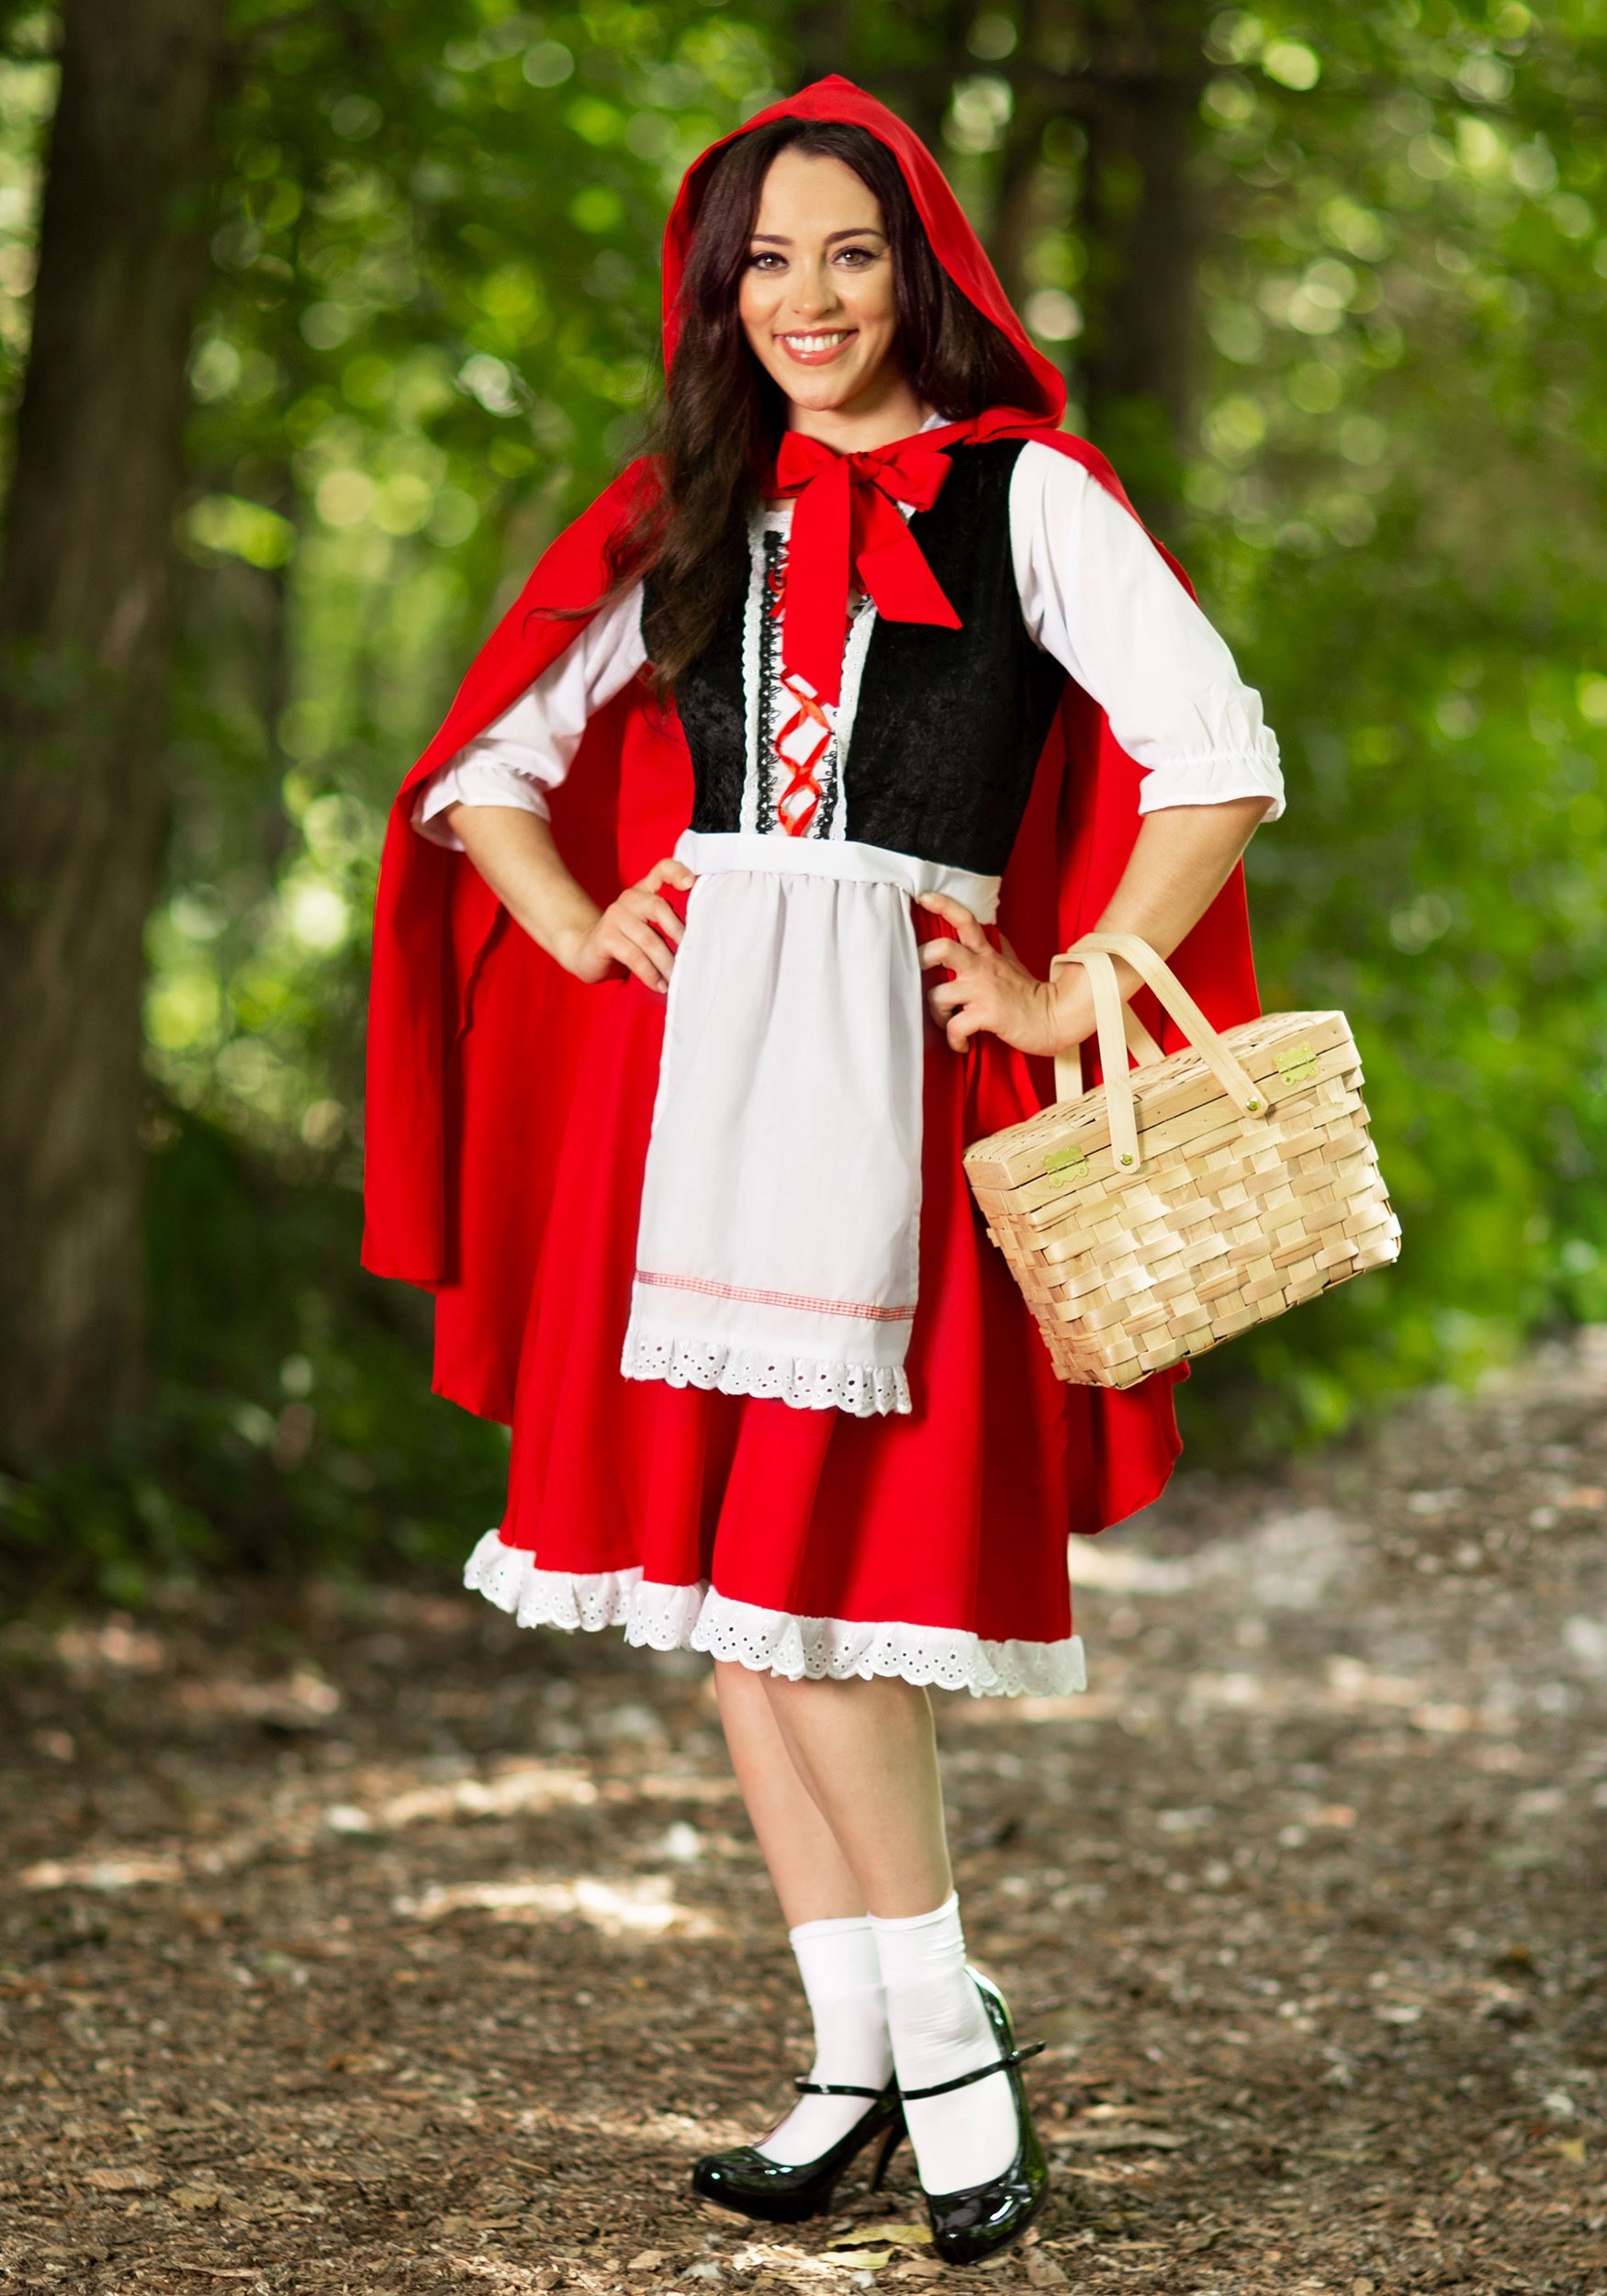 DIY Little Red Riding Hood Costume For Adults
 Little Red Riding Hood Costume for Adults